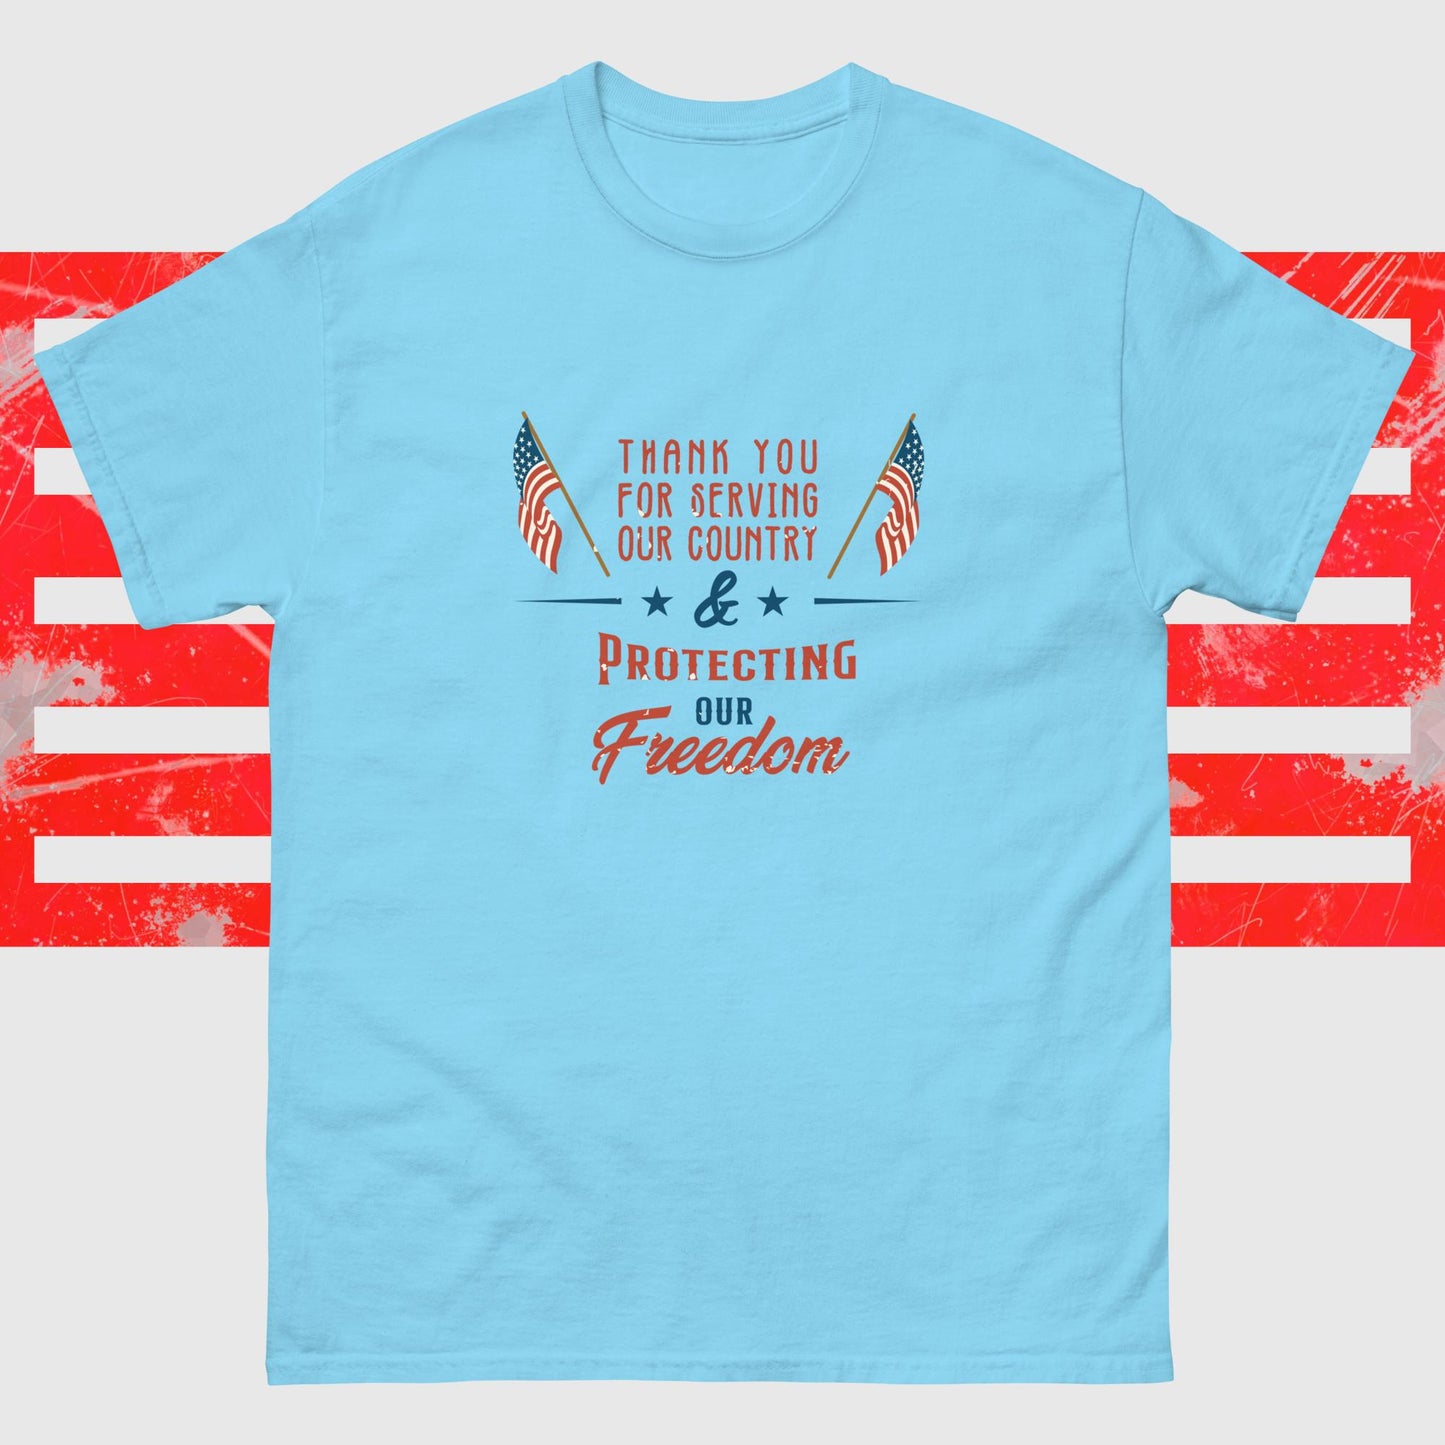 PATRIOTIC TEE FOR VETERANS DAY PROTECTING FREEDOM SKY FRONT - www.firstamericanstore.com